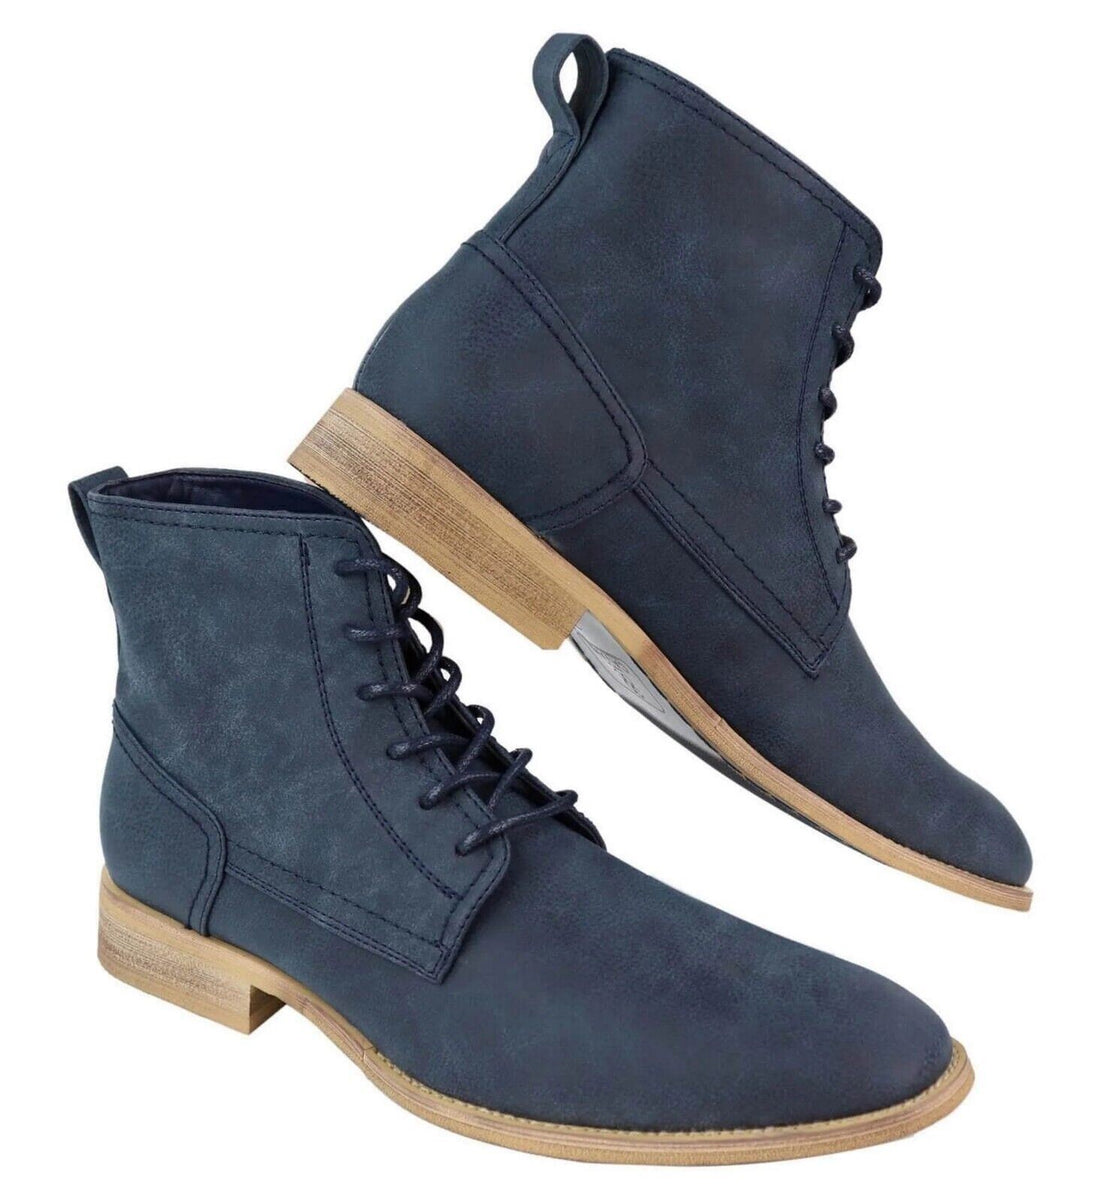 Mens Matt Navy Suede Lace Up Ankle Boots - Upperclass Fashions 